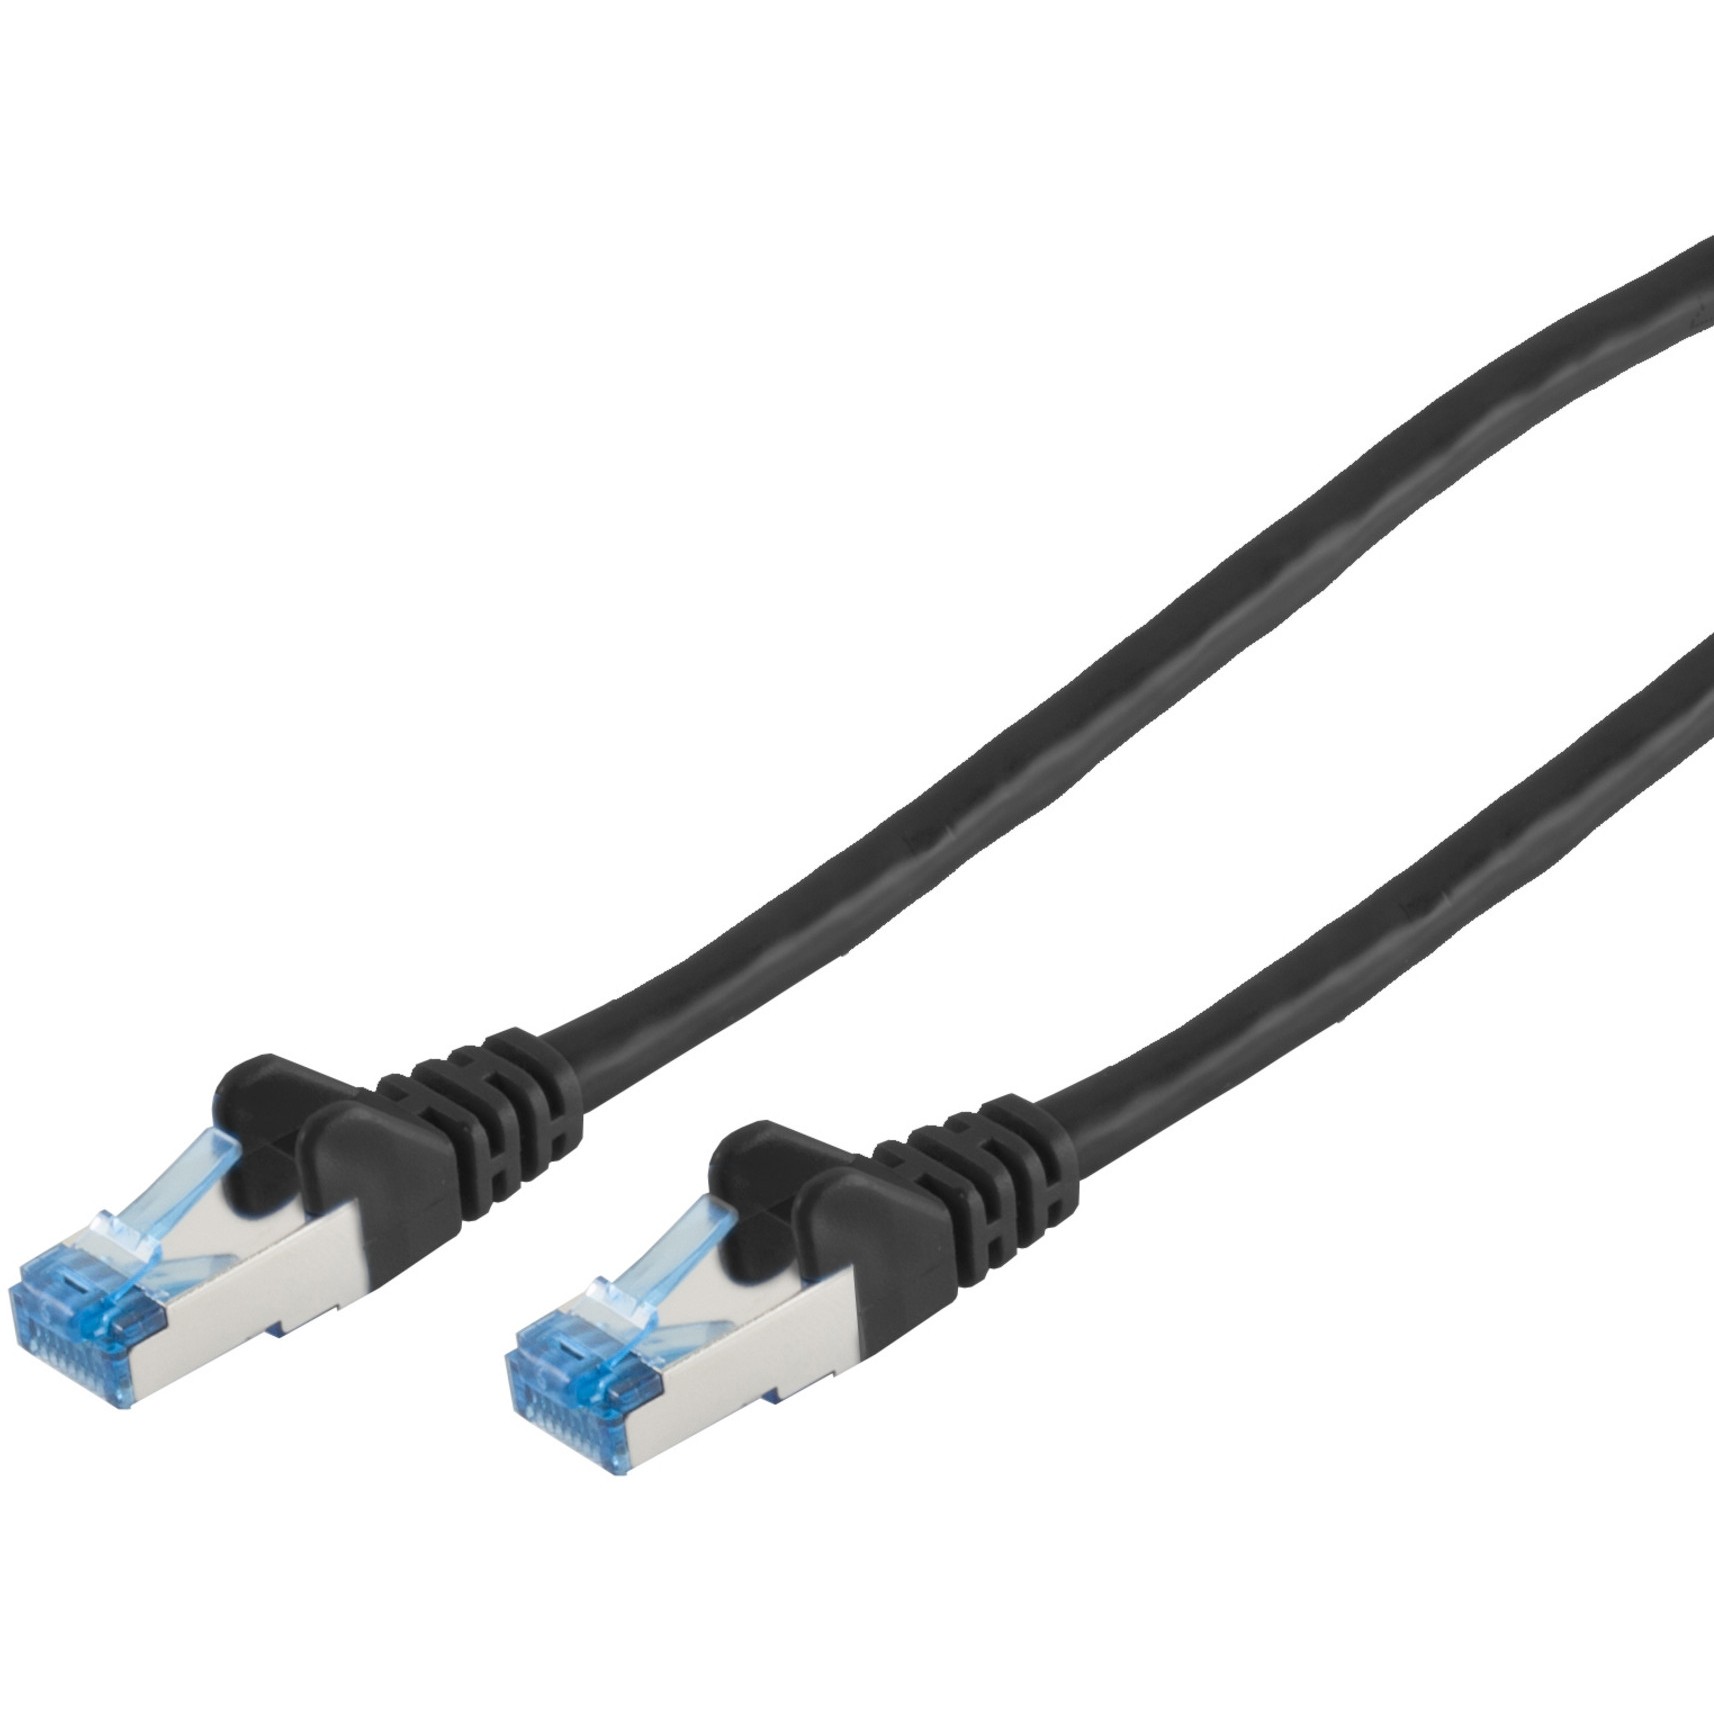 S-Conn 75725-S networking cable